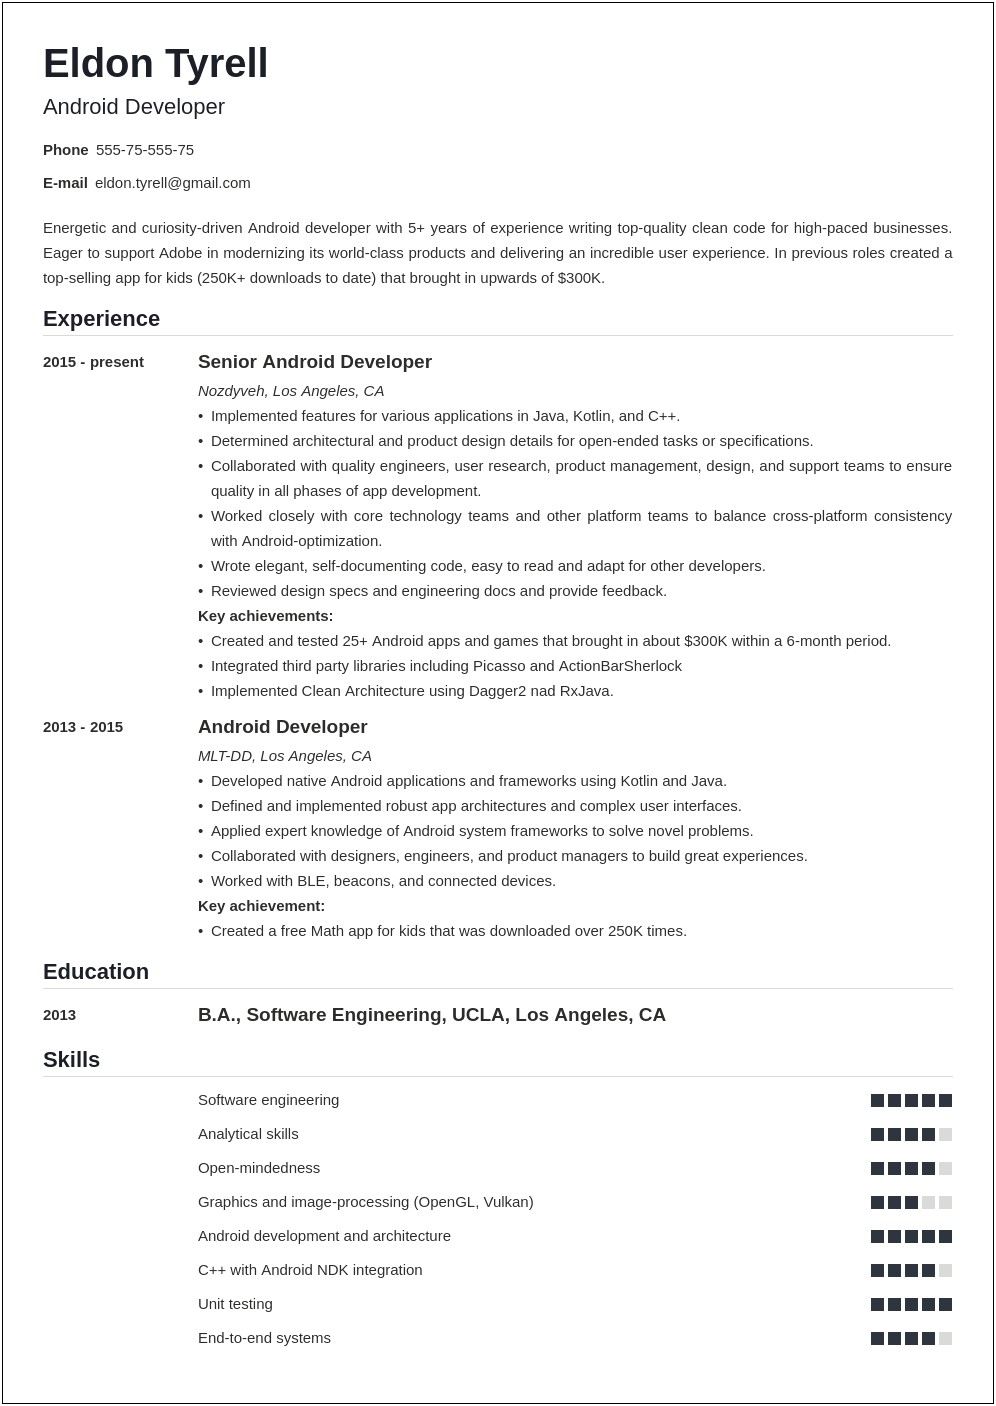 Android Developer Resume 5 Years Experience